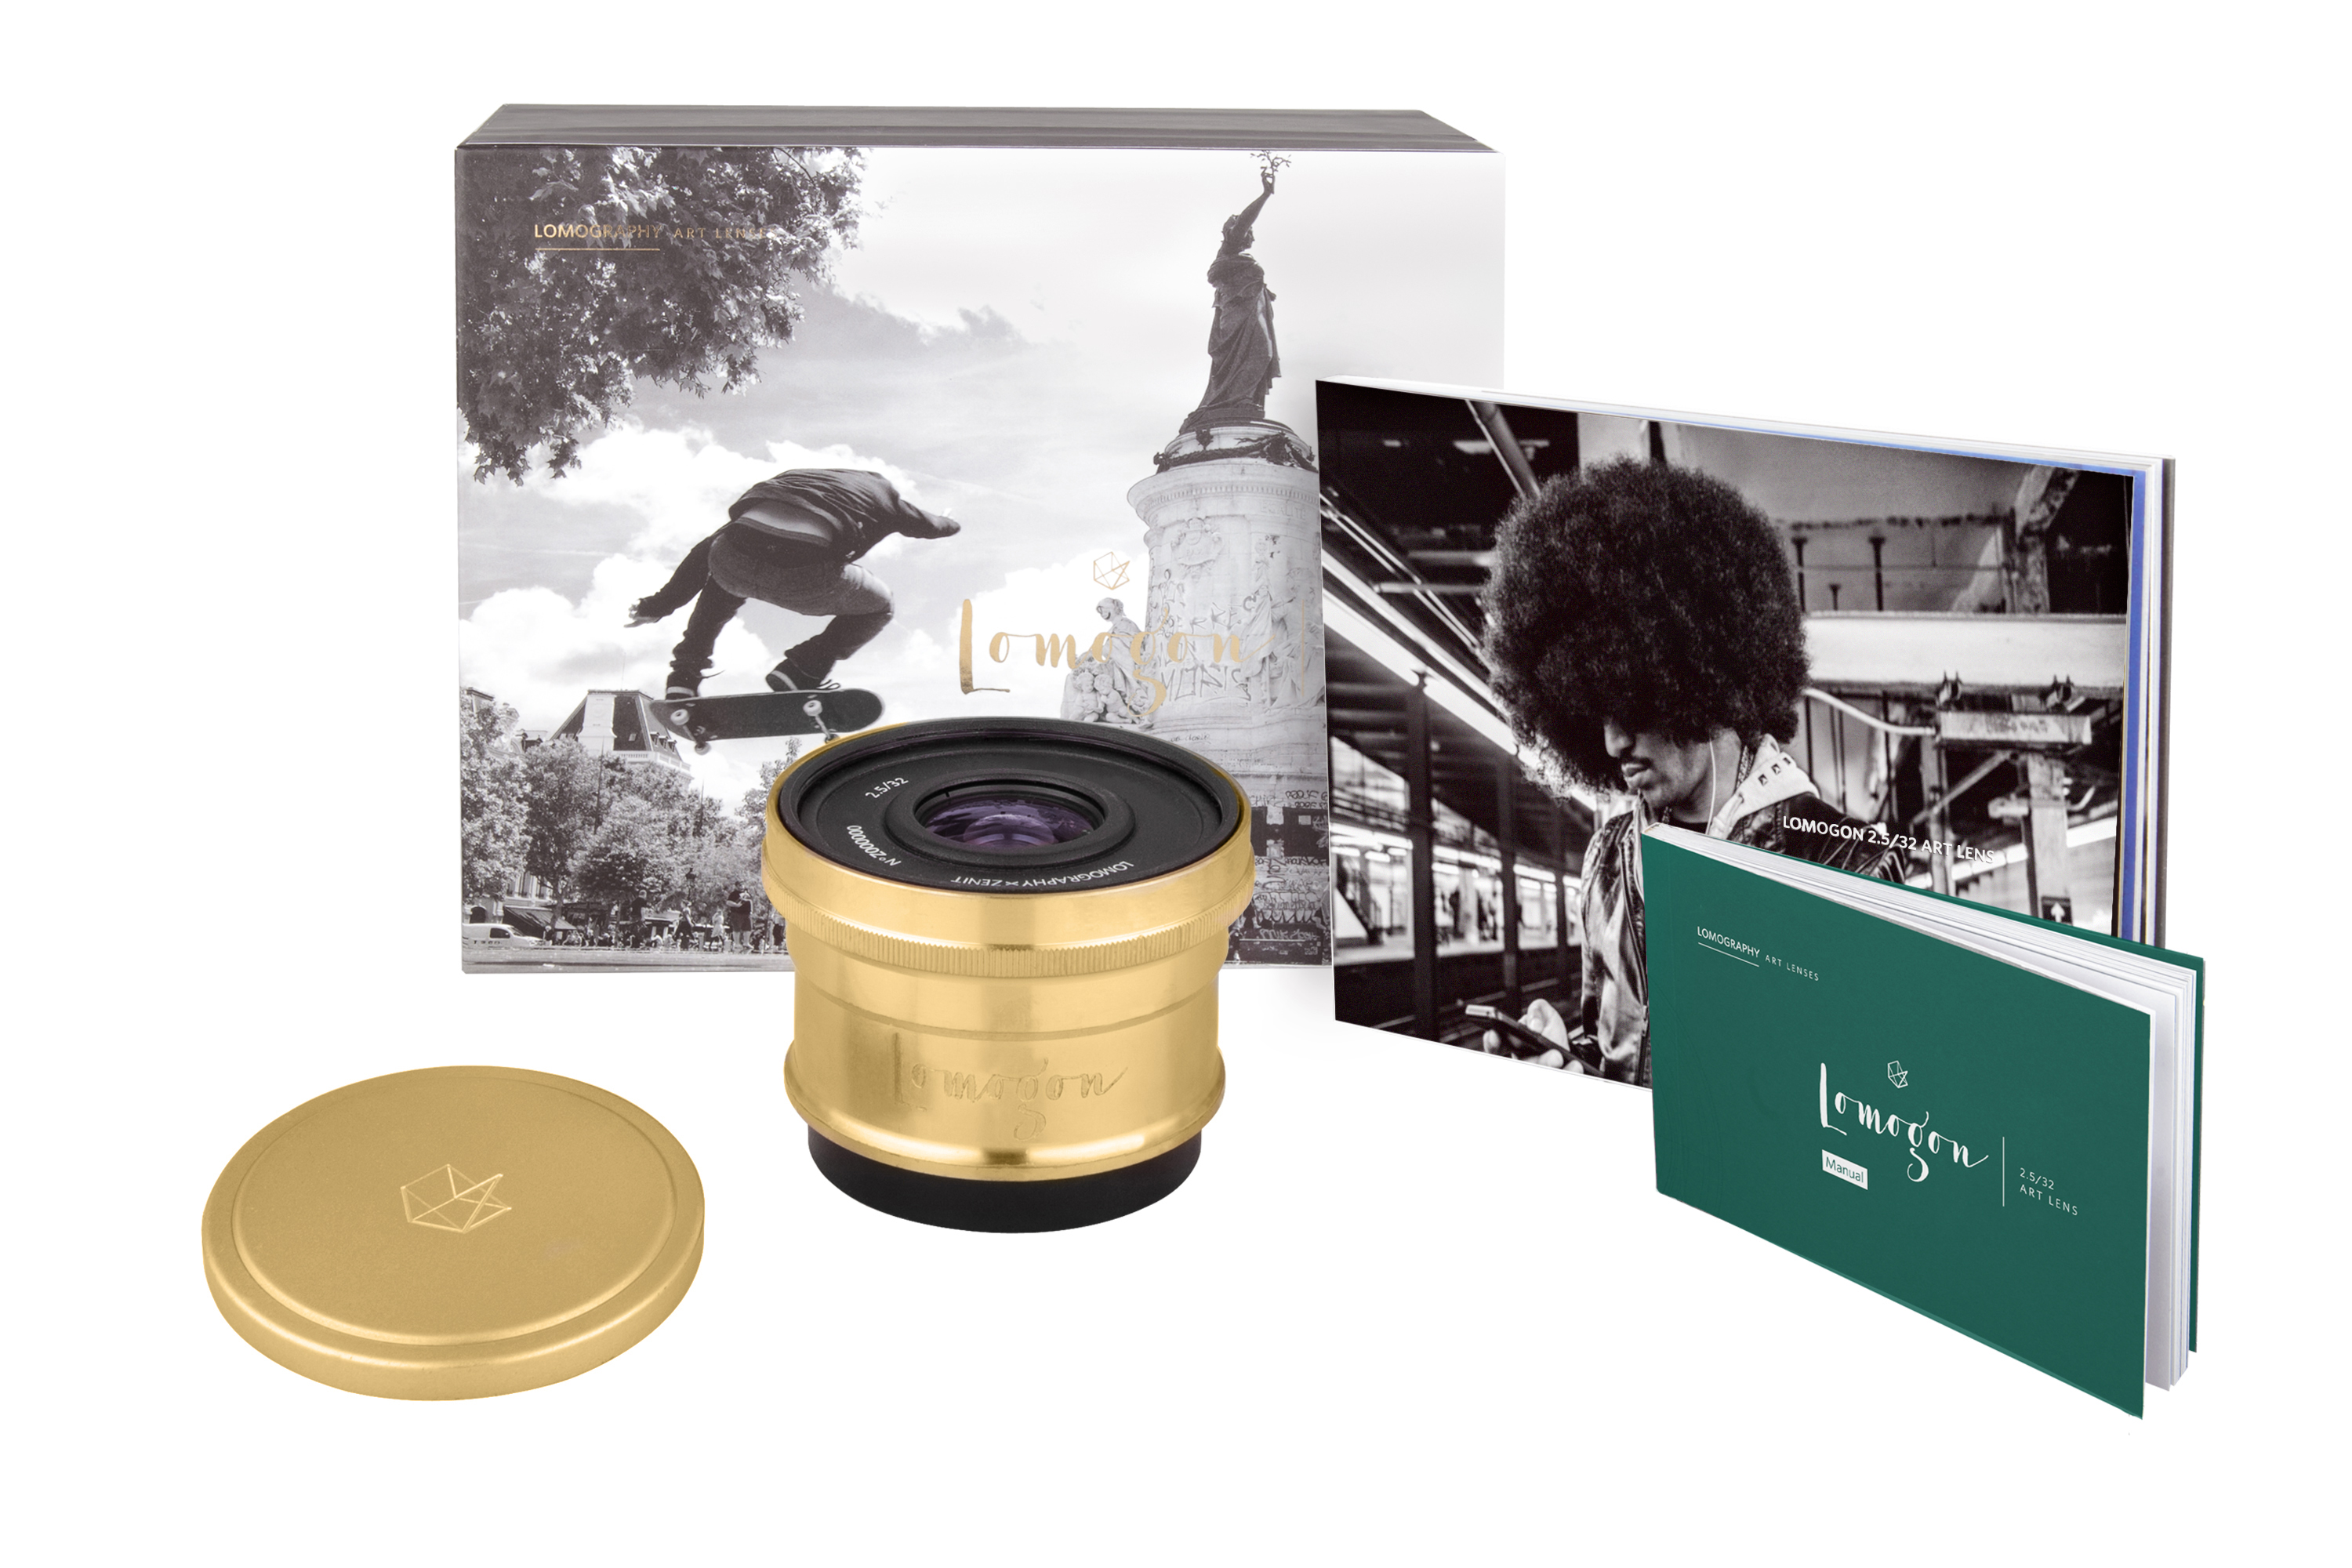 Lomogon a handcrafted lens to electrify your street adventures